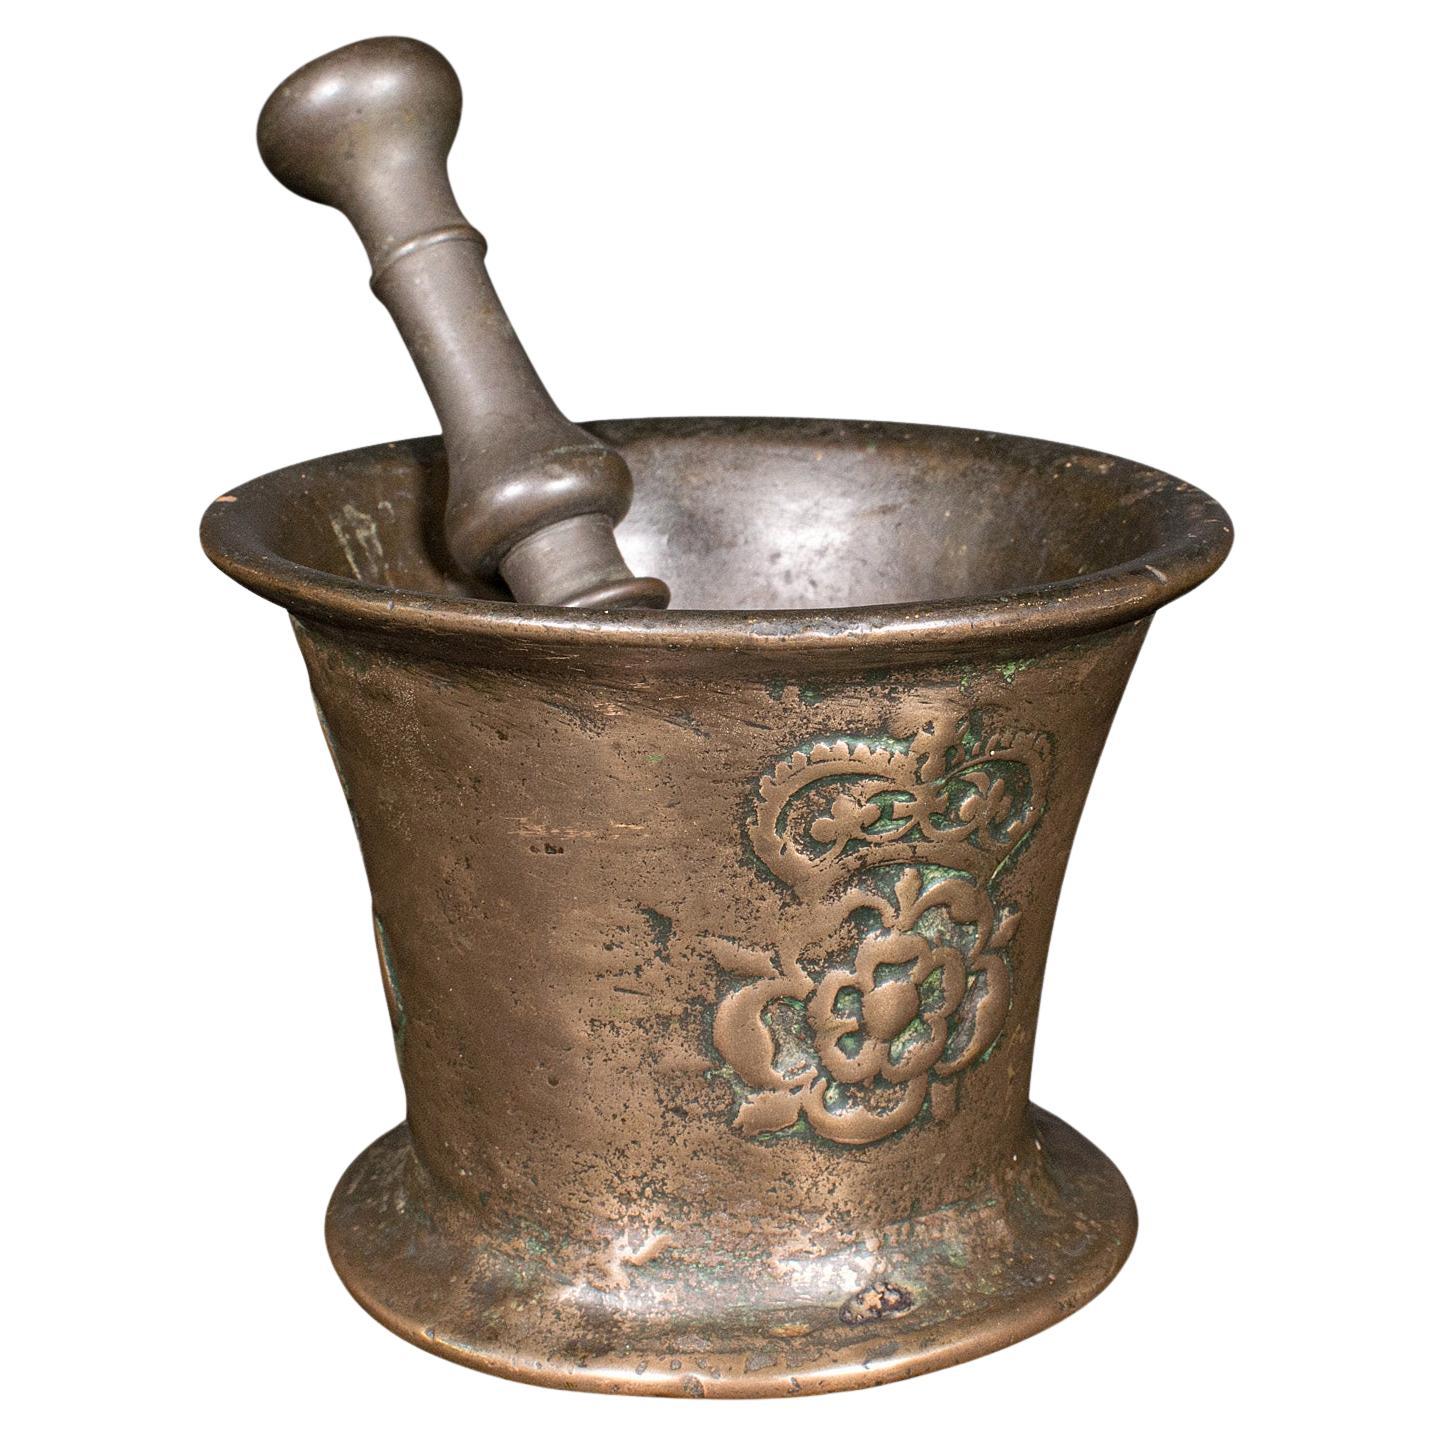 Antique Tudor Rose Mortar And Pestle, English, Bronze, Apothecary, 17th Century For Sale